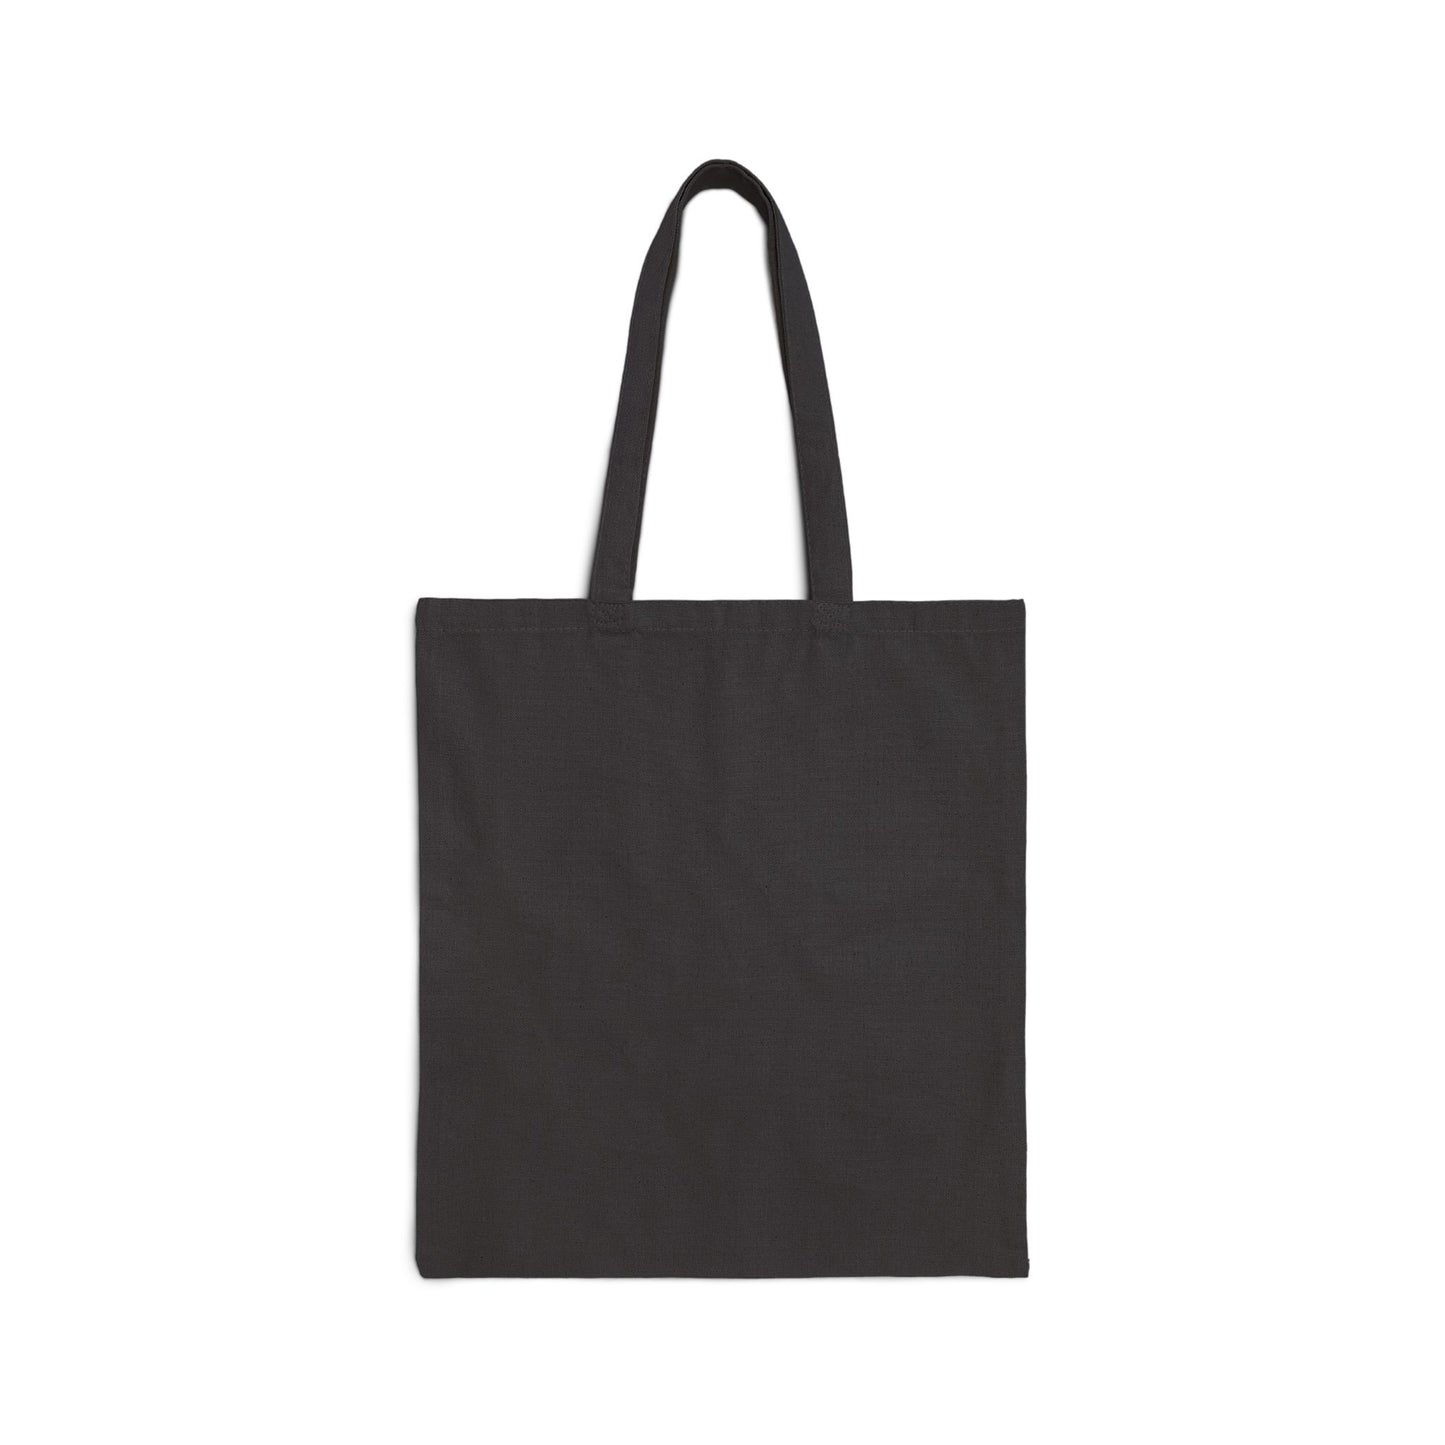 If It Ain't EXTRA I Don't Want It Tote Bag - Stylish and Durable | Shop Now!